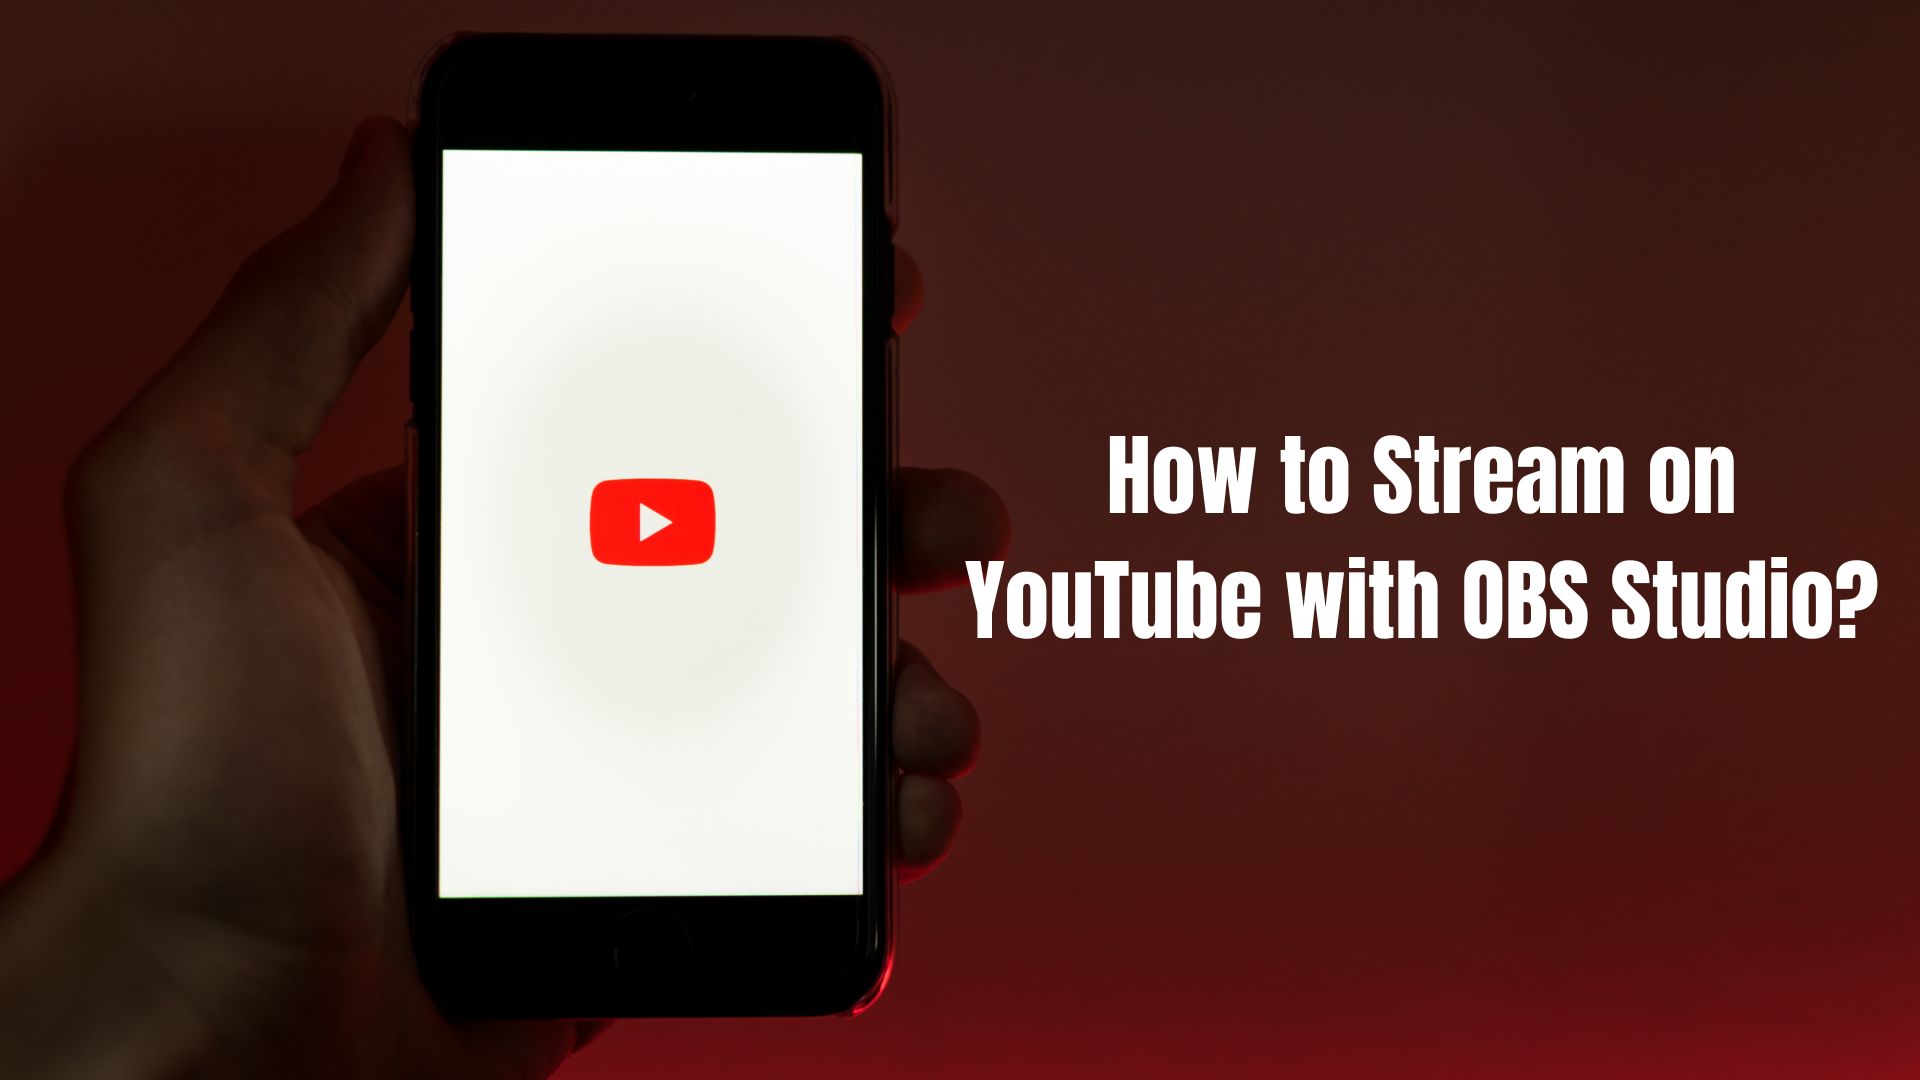 How to Stream on YouTube with OBS Studio